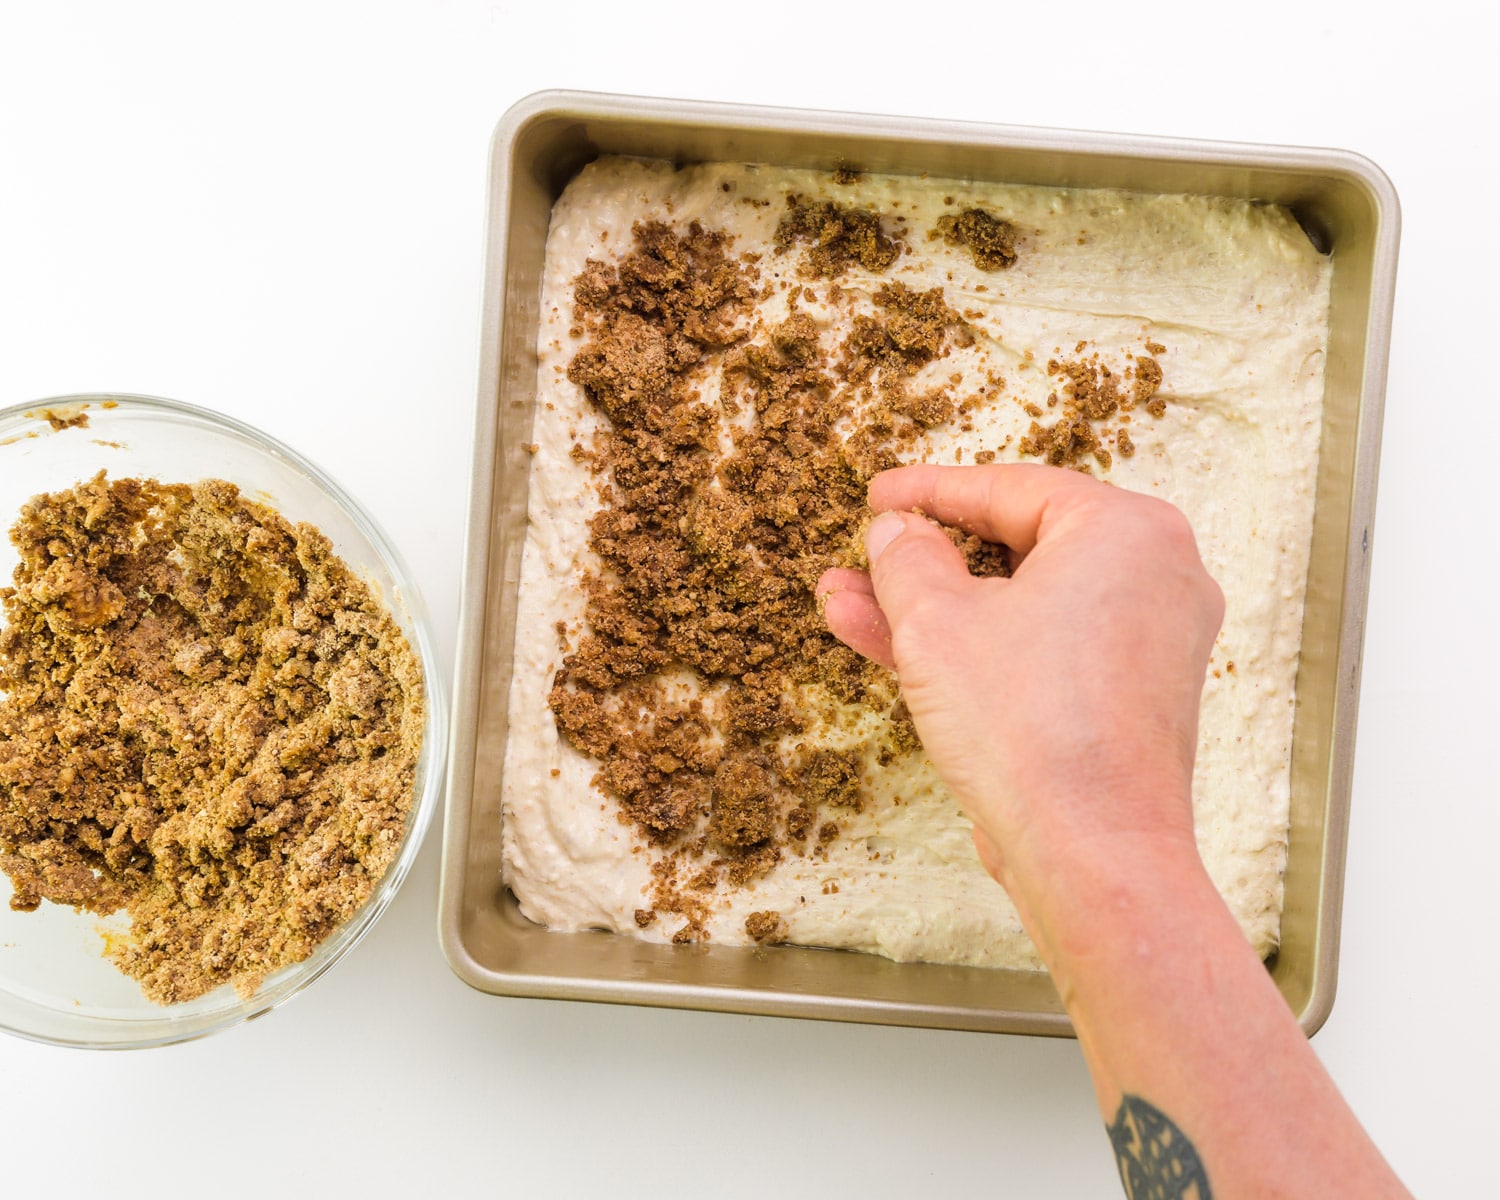 A hand distributes cinnamon filling mixture over cake batter in a baking pan.